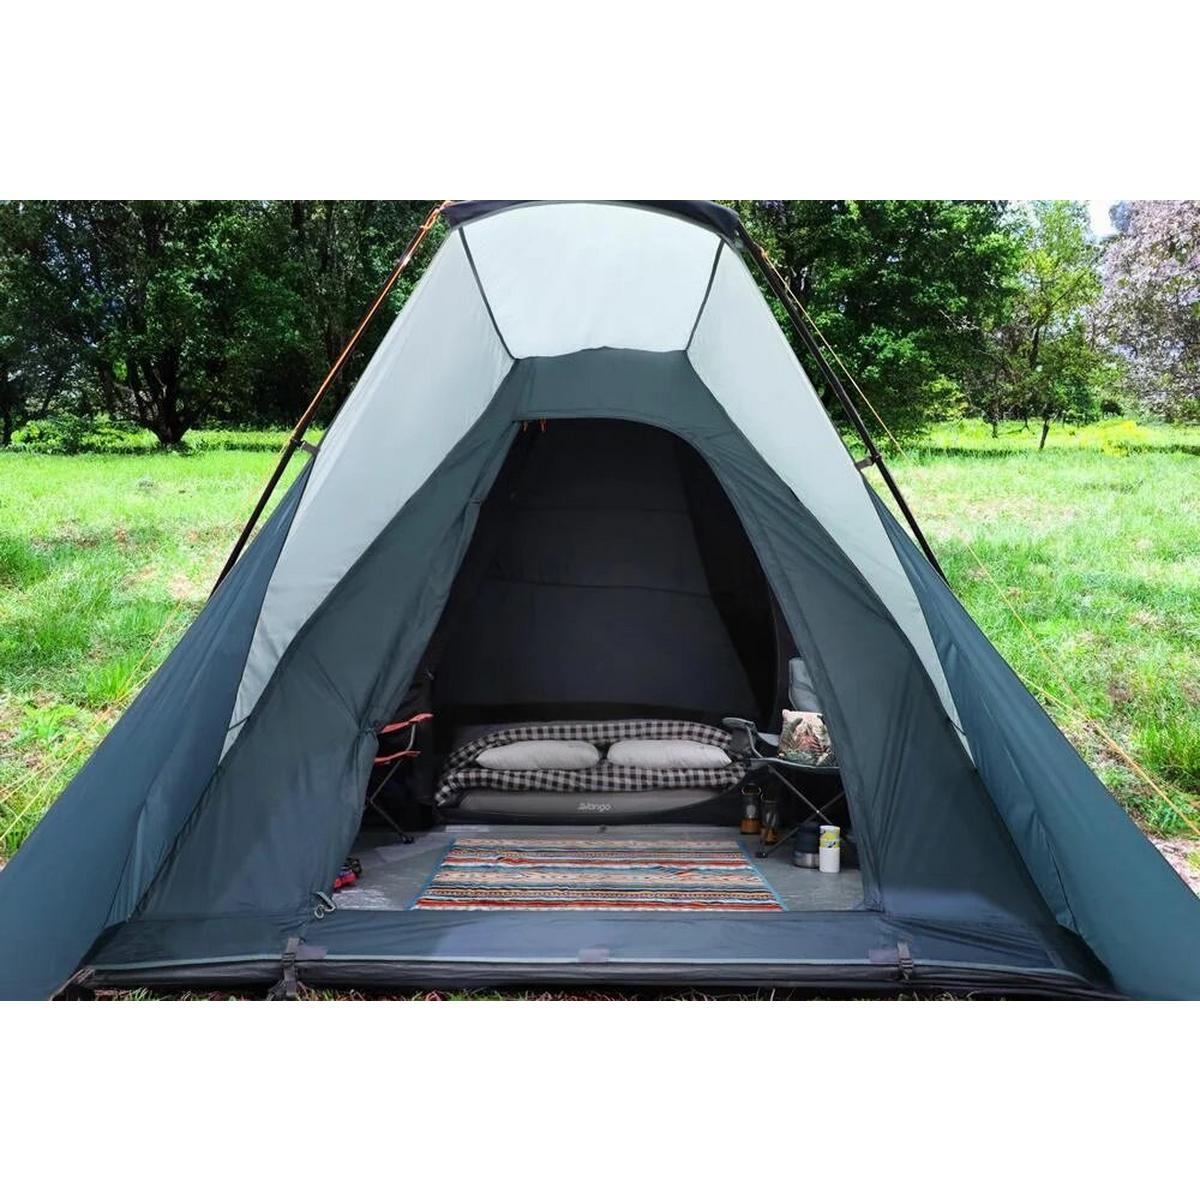 Vango Teepee Air 400 4-person Tent - Mineral Green